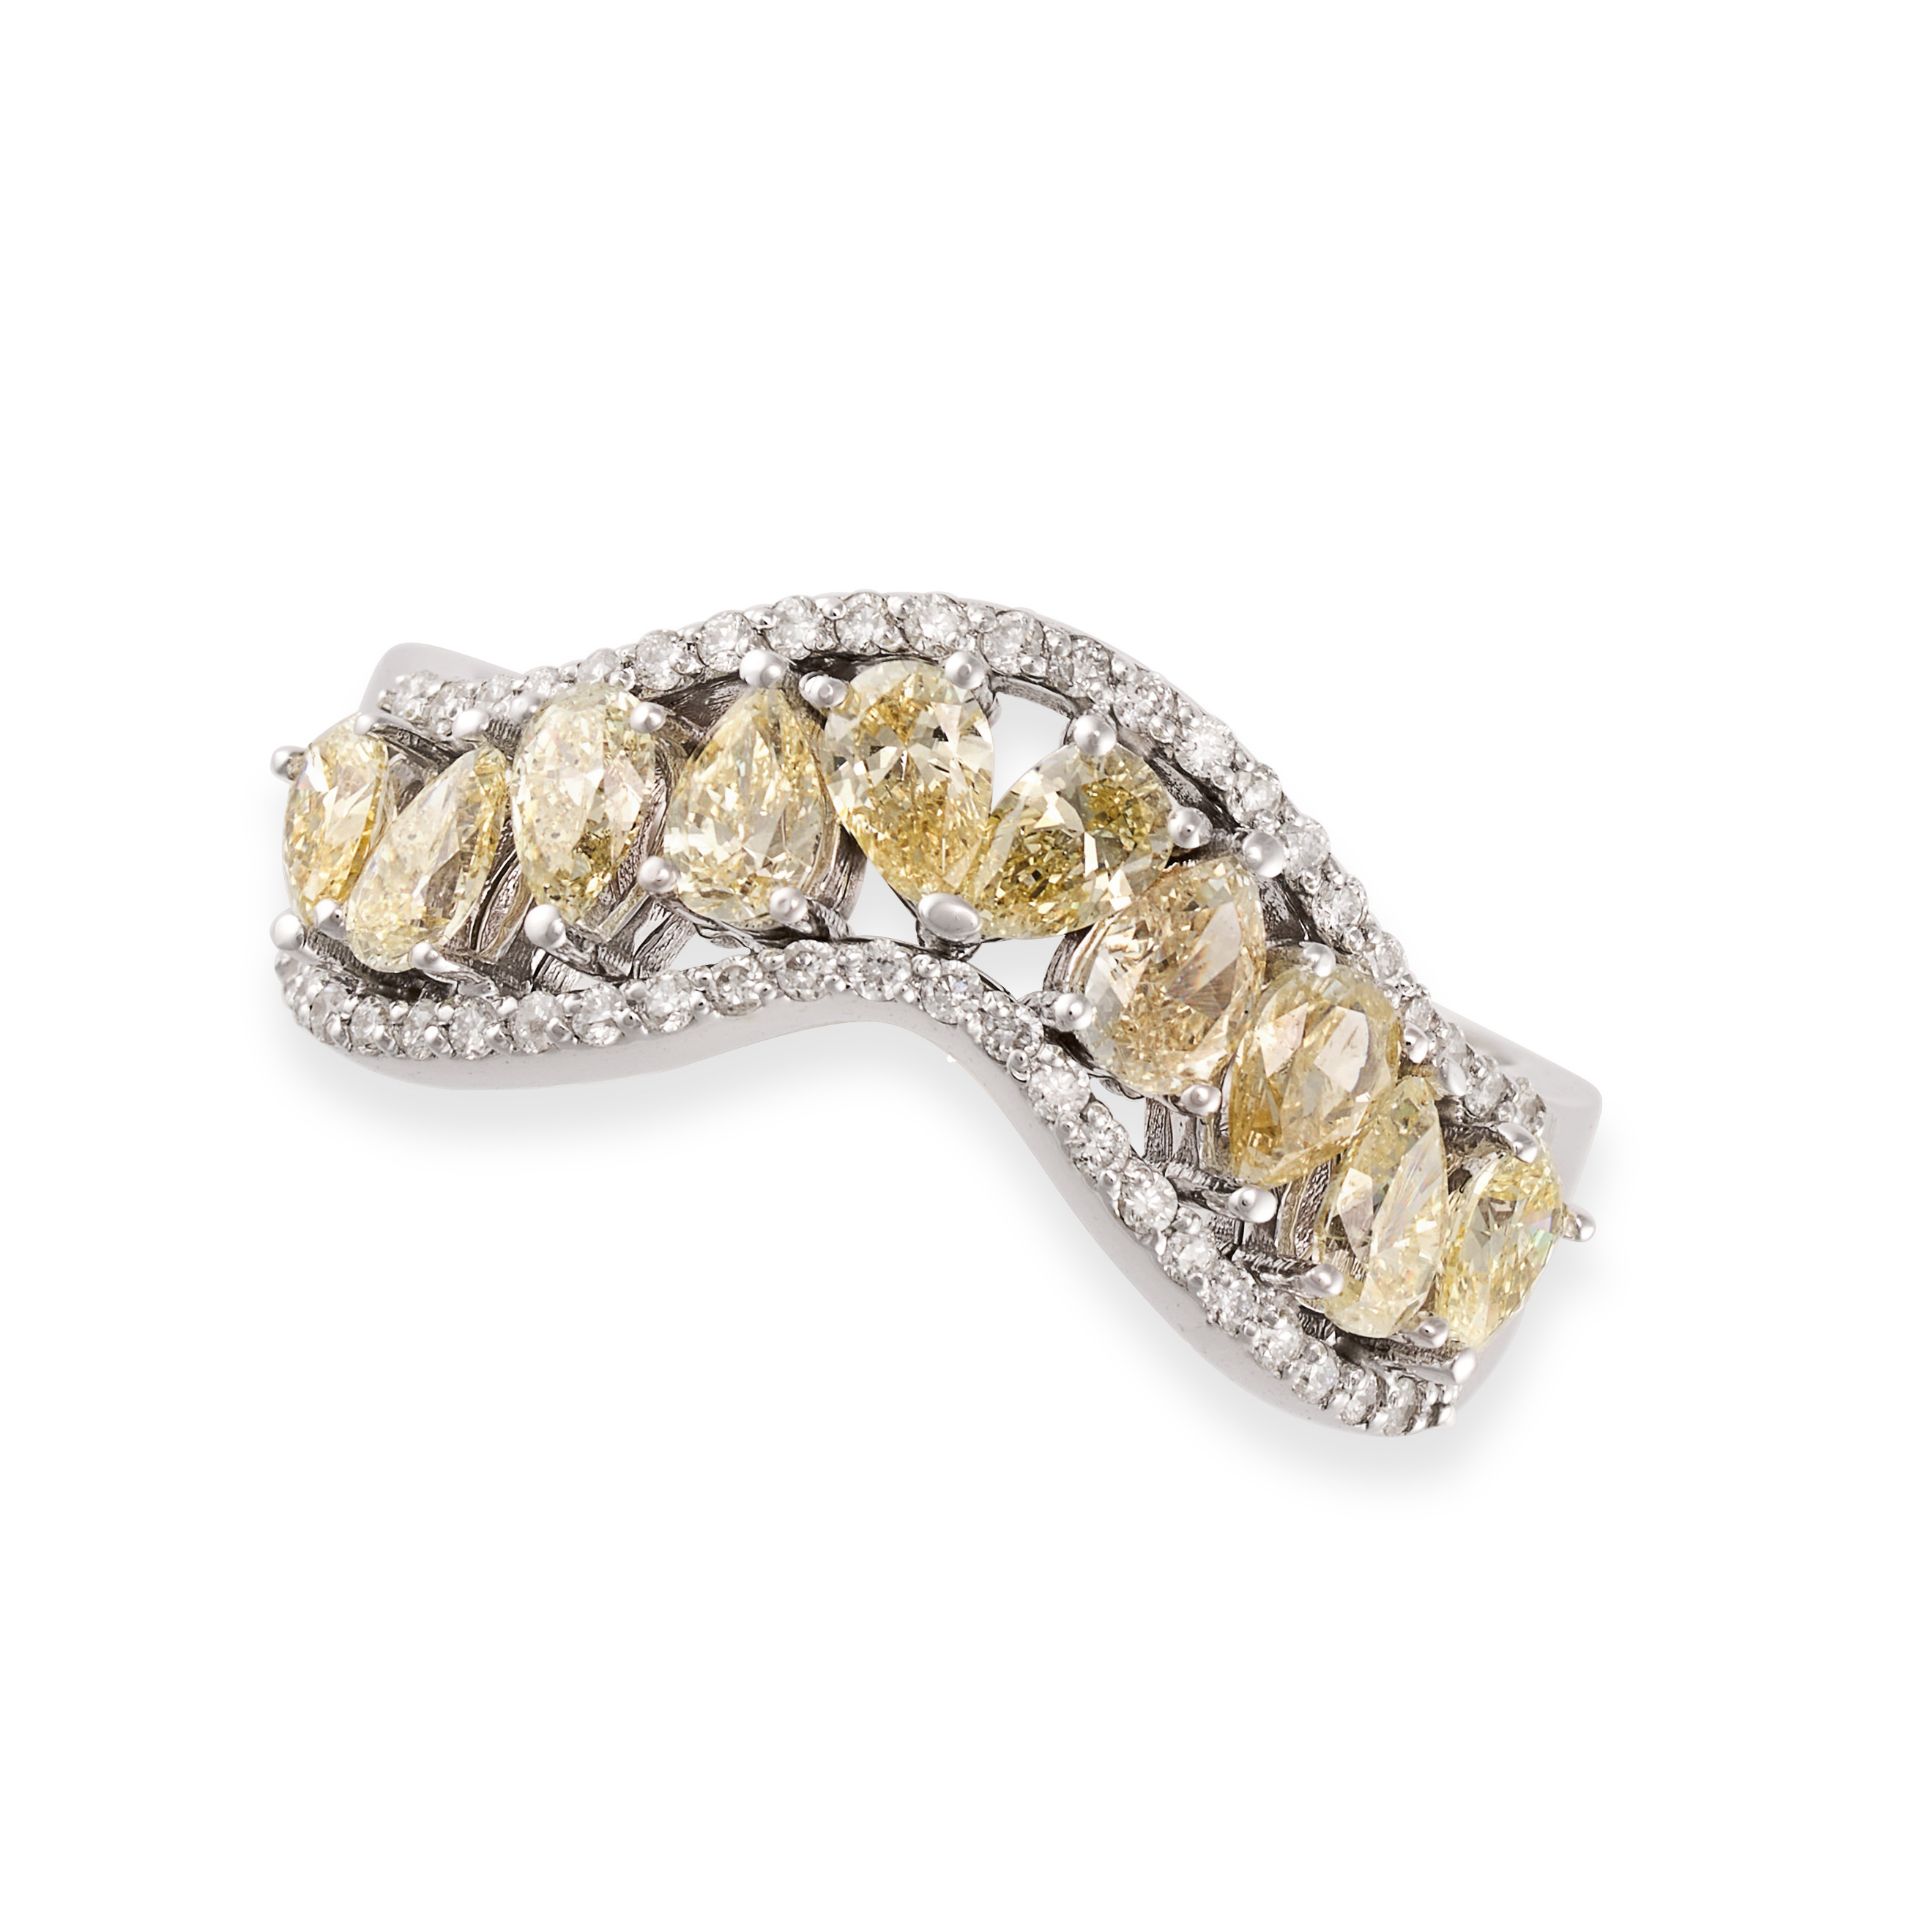 A DIAMOND DRESS RING in 14ct white gold, set with a row of pear cut yellow diamonds accented by r...